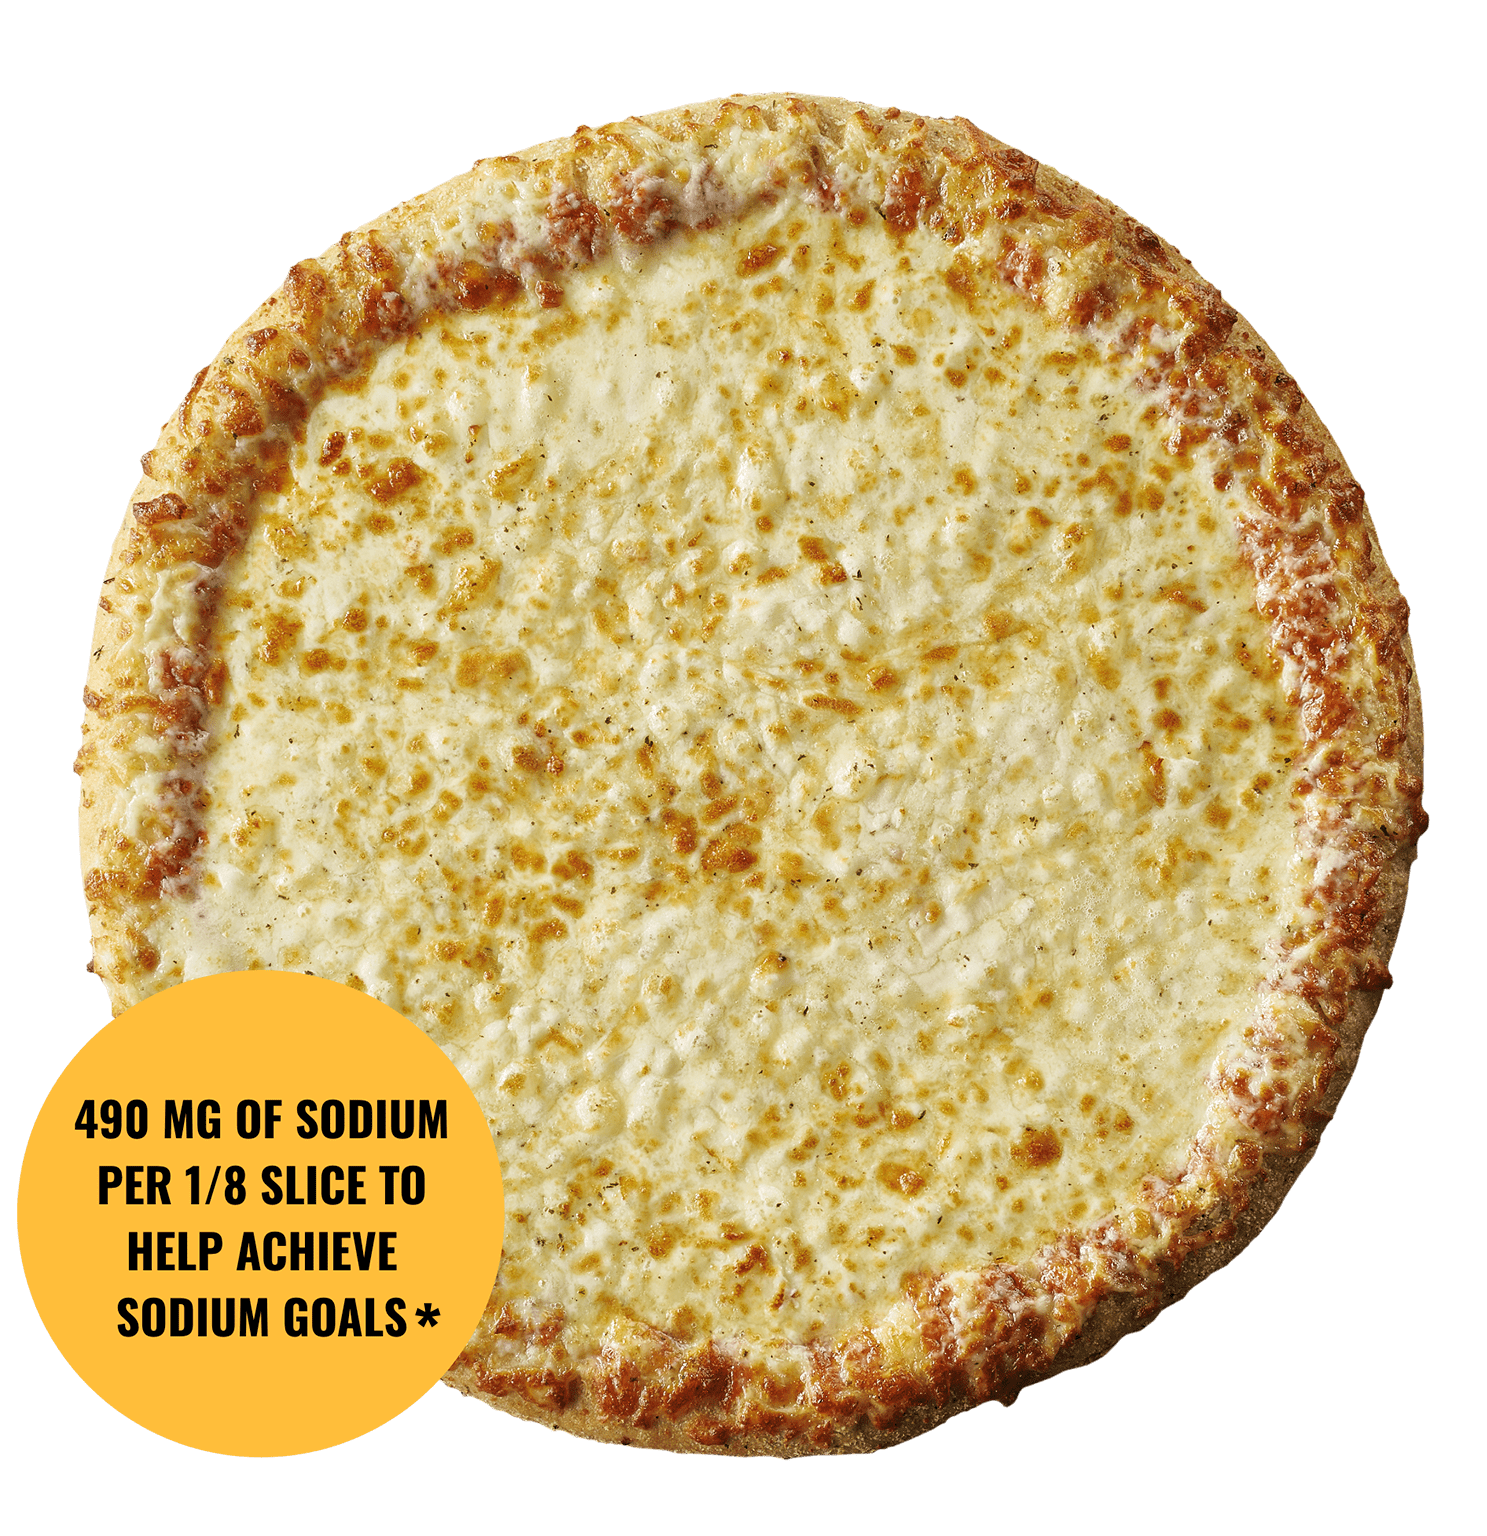 It's never enough cheese! Add stuffed crust to your pizza for only 0.700  fils for large pizzas! 😍 Order now online at www.papajohns.bh or …